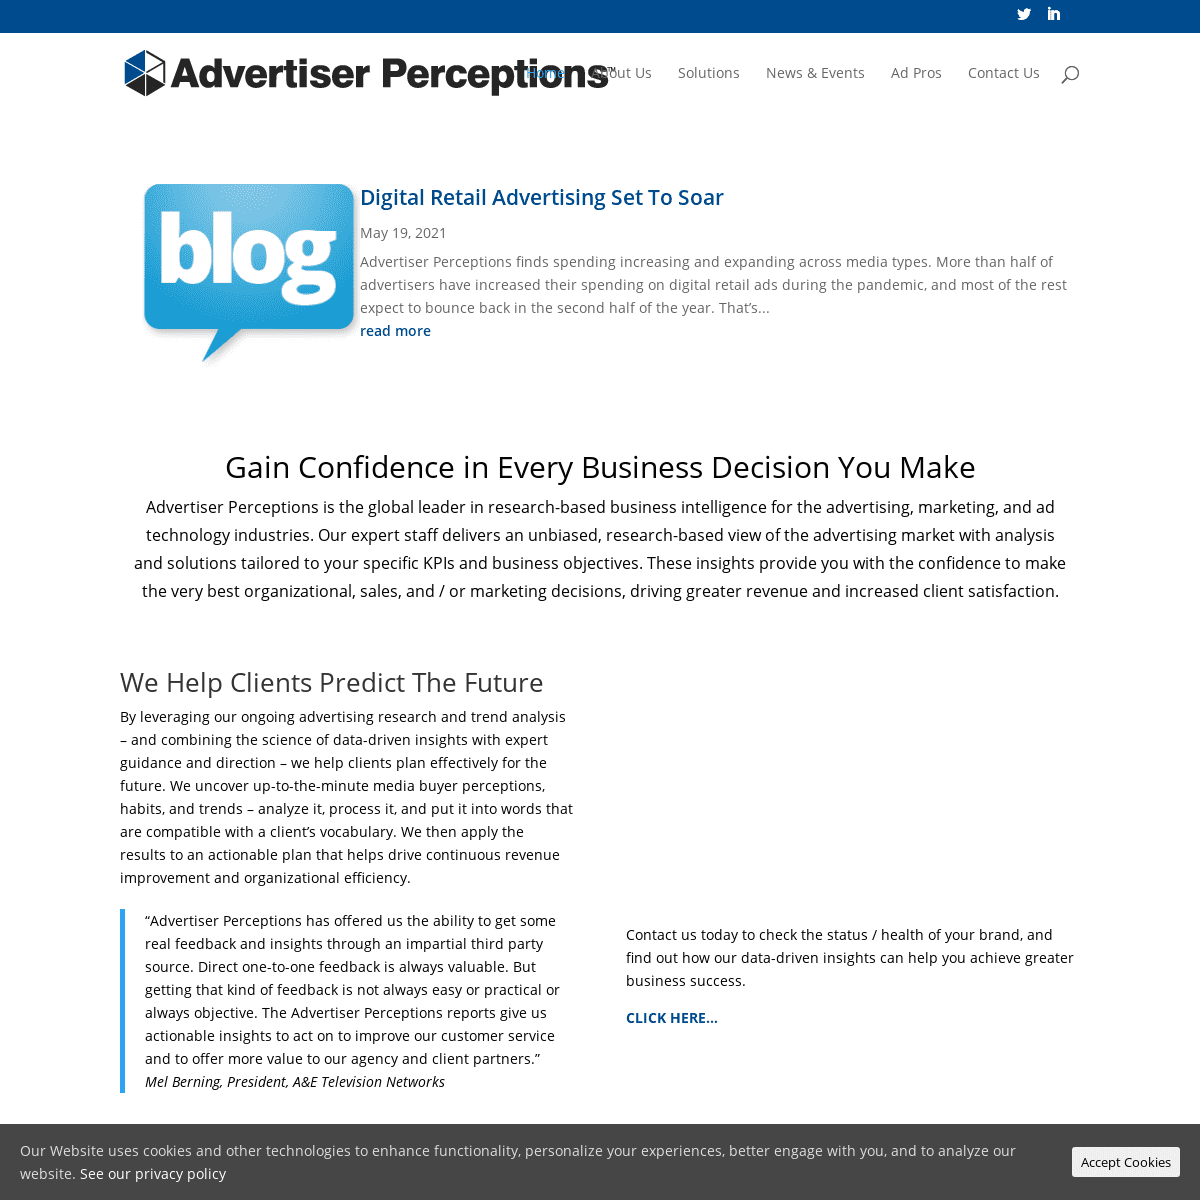 A complete backup of https://advertiserperceptions.com